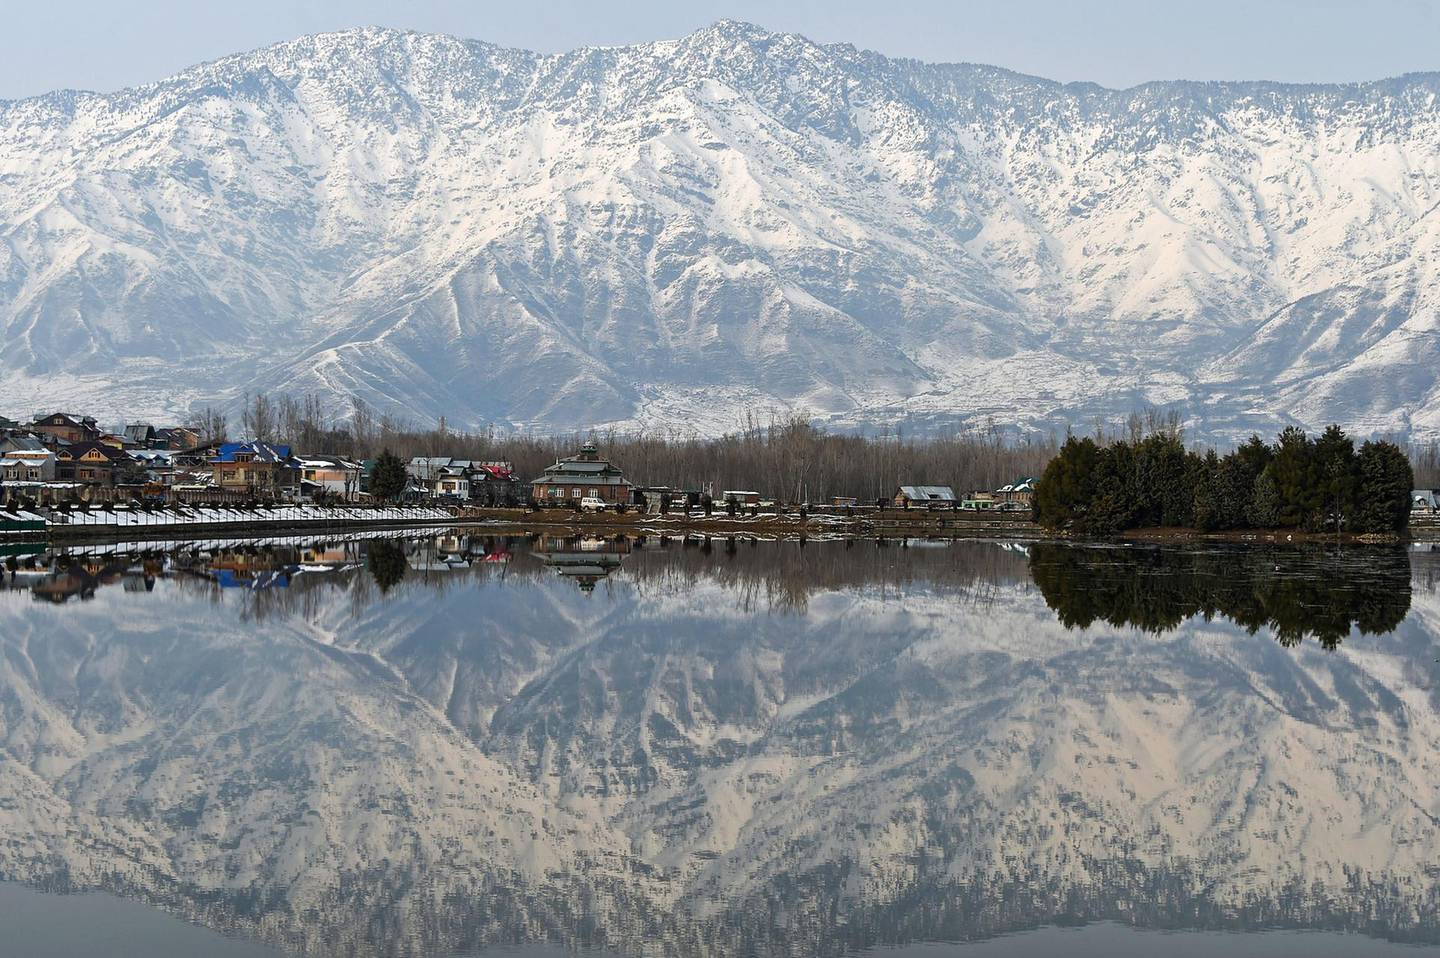 Kashmiri snow-covered mountains are reflected in Dal Lake in Srinagar on February 9, 2019. - Beause of recent heavy snowfalls, the roads in Kashmir linking with the rest of India and the Jammu-Srinagar national highway were cut off. (Photo by TAUSEEF MUSTAFA / AFP)